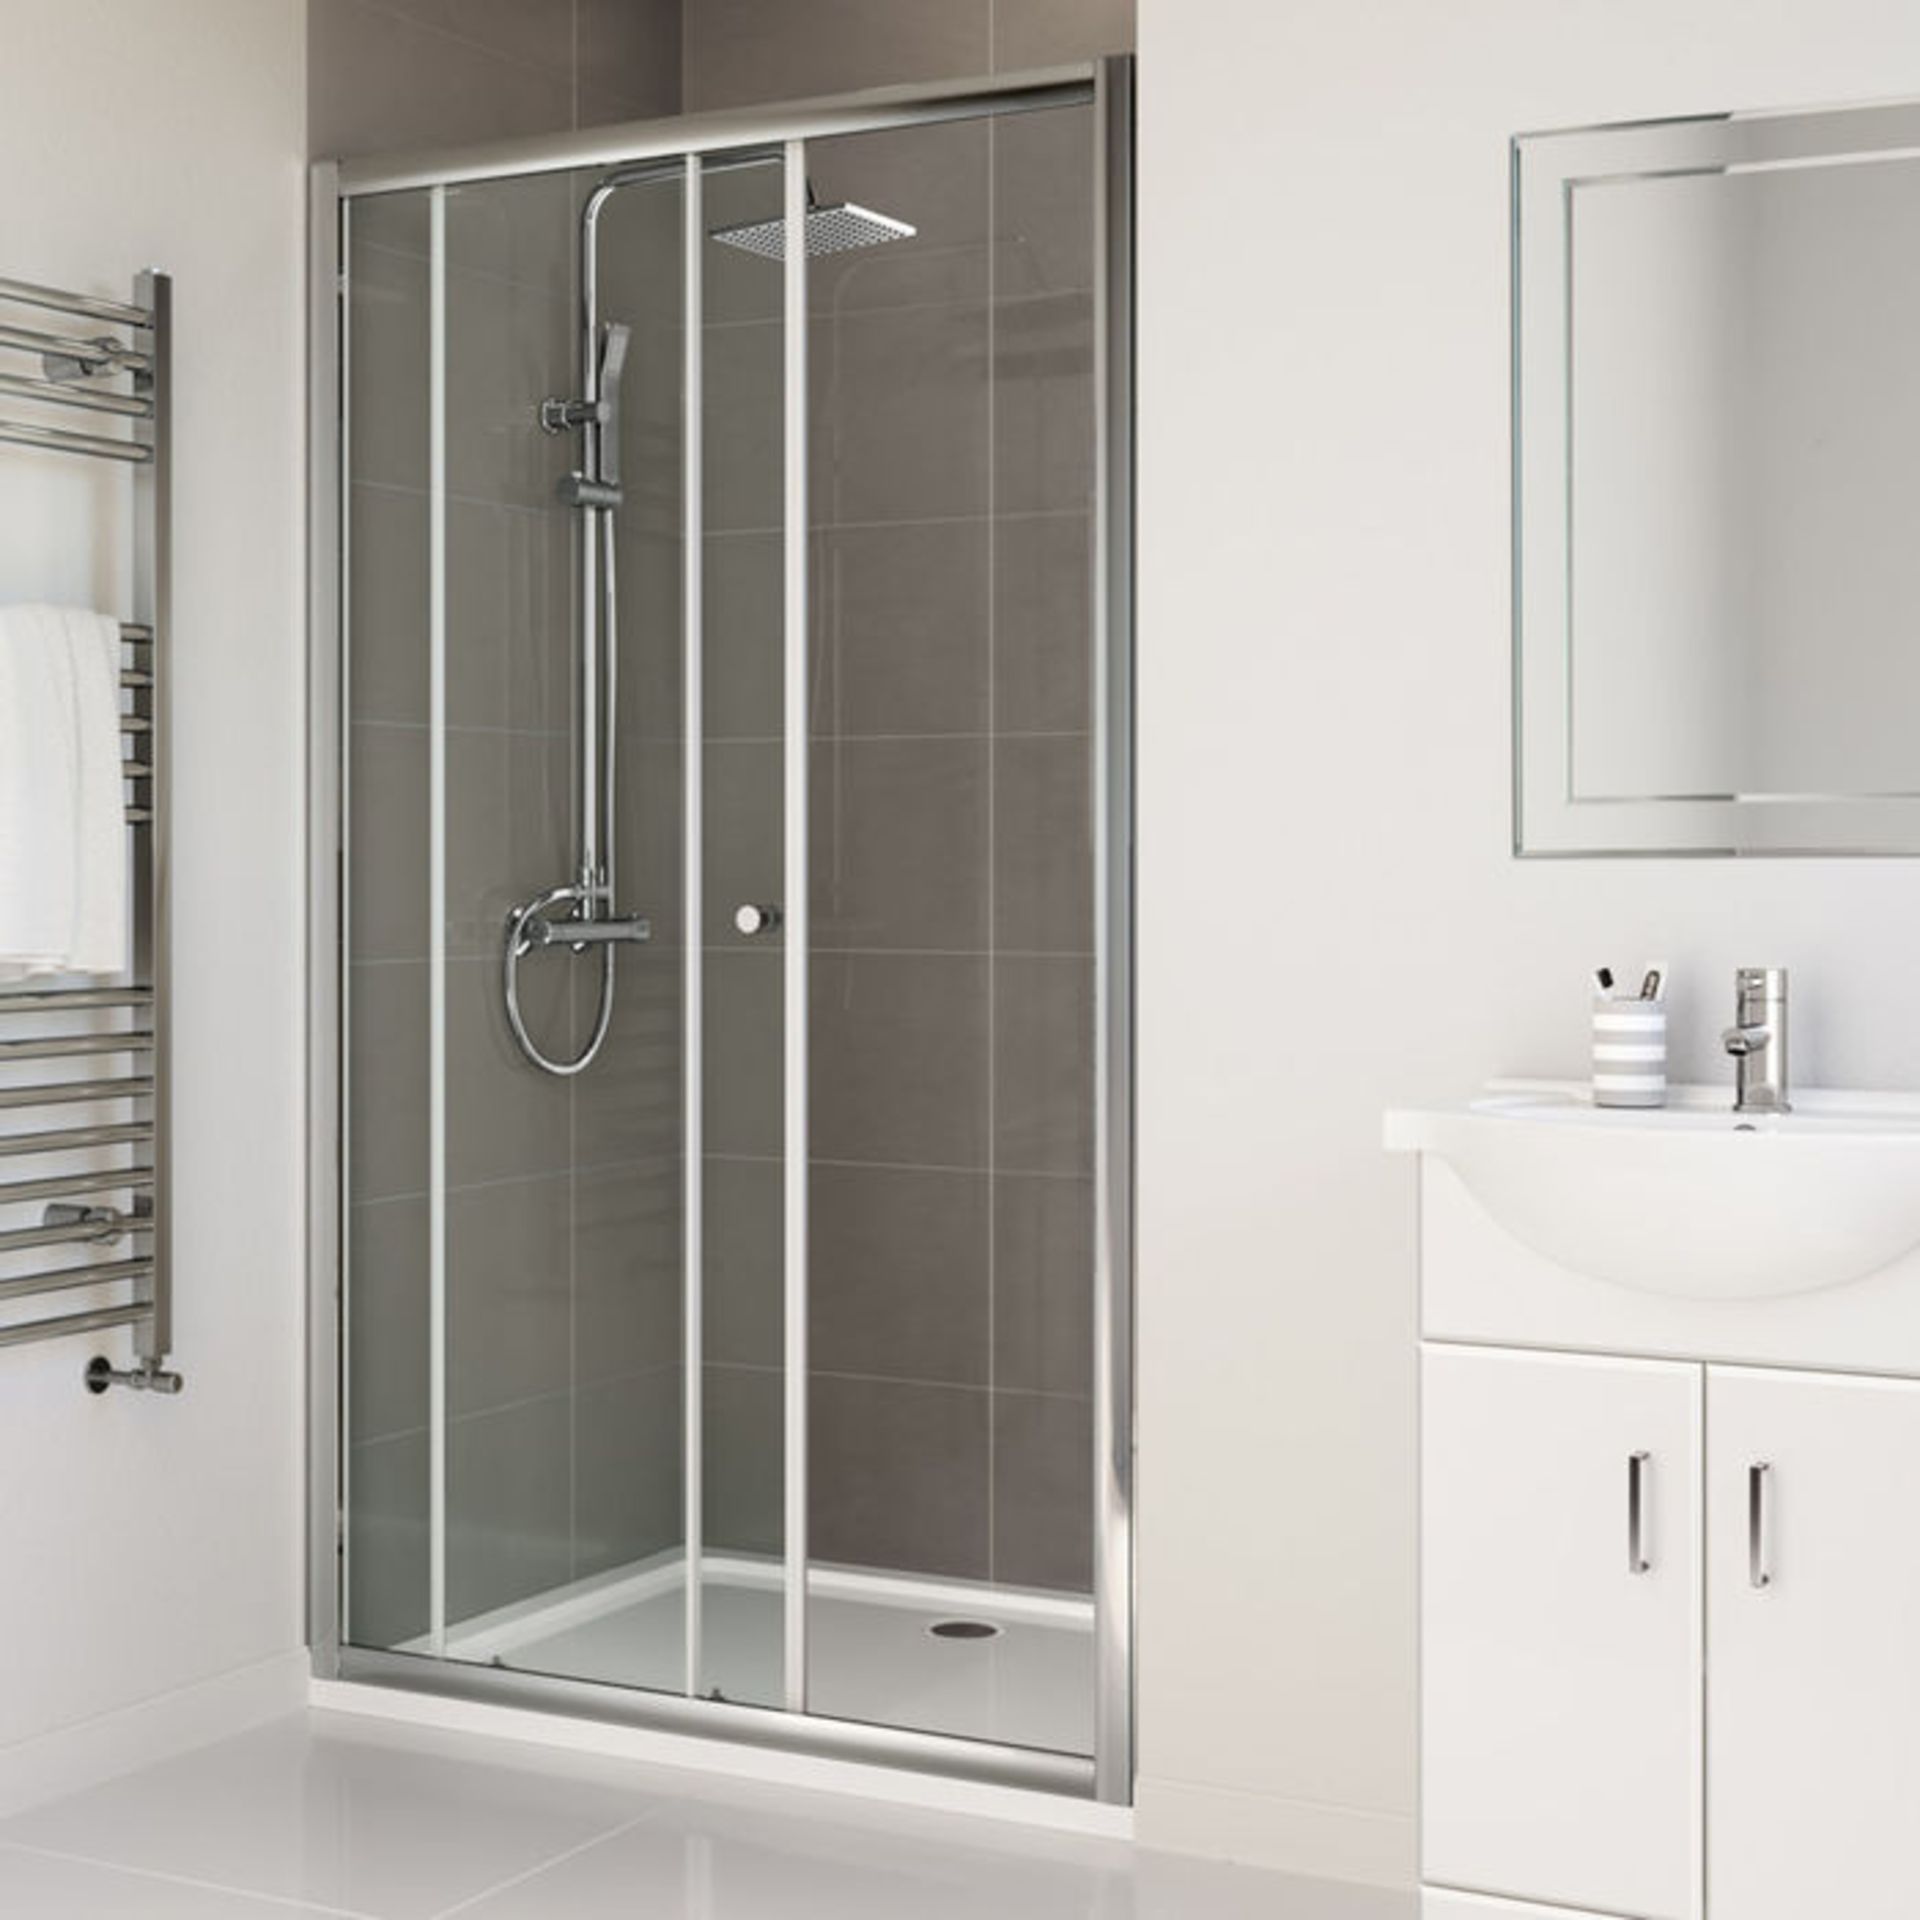 Twyfords 1000mm - Elements Sliding Shower Door. RRP £299.99. 8mm Safety Glass Fully waterproof... - Image 2 of 3